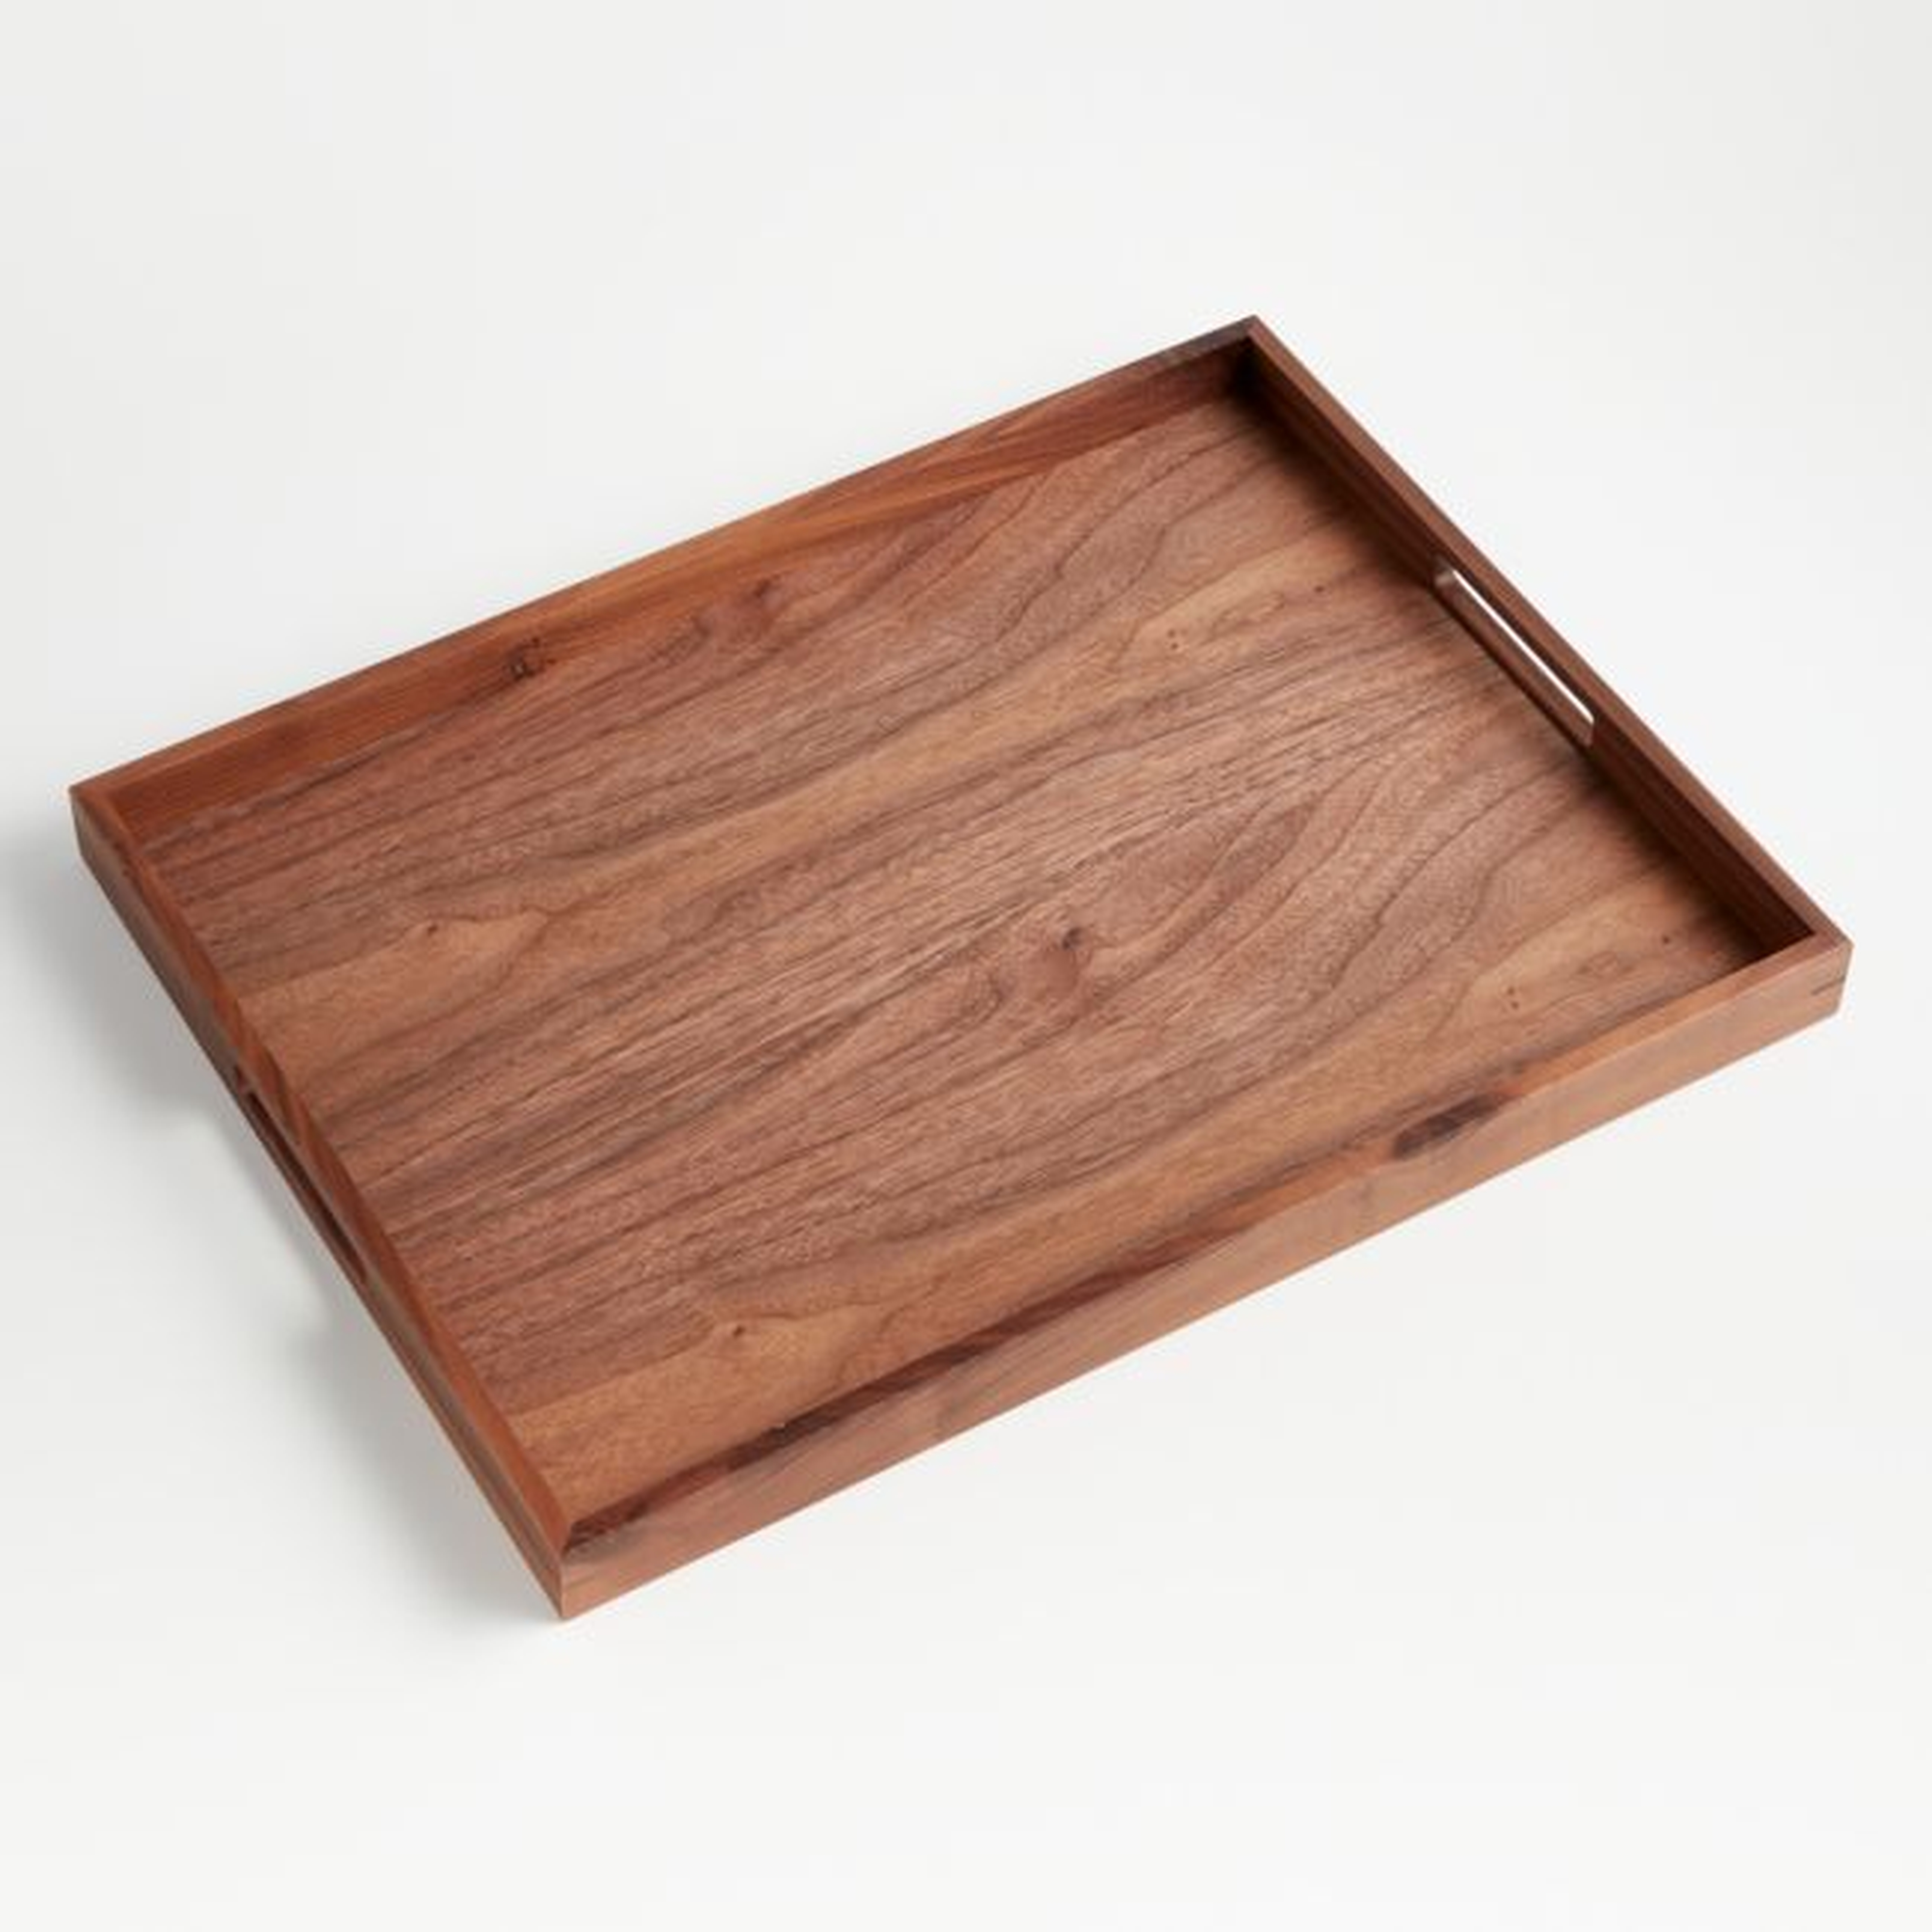 Willoughby Large Tray - Crate and Barrel